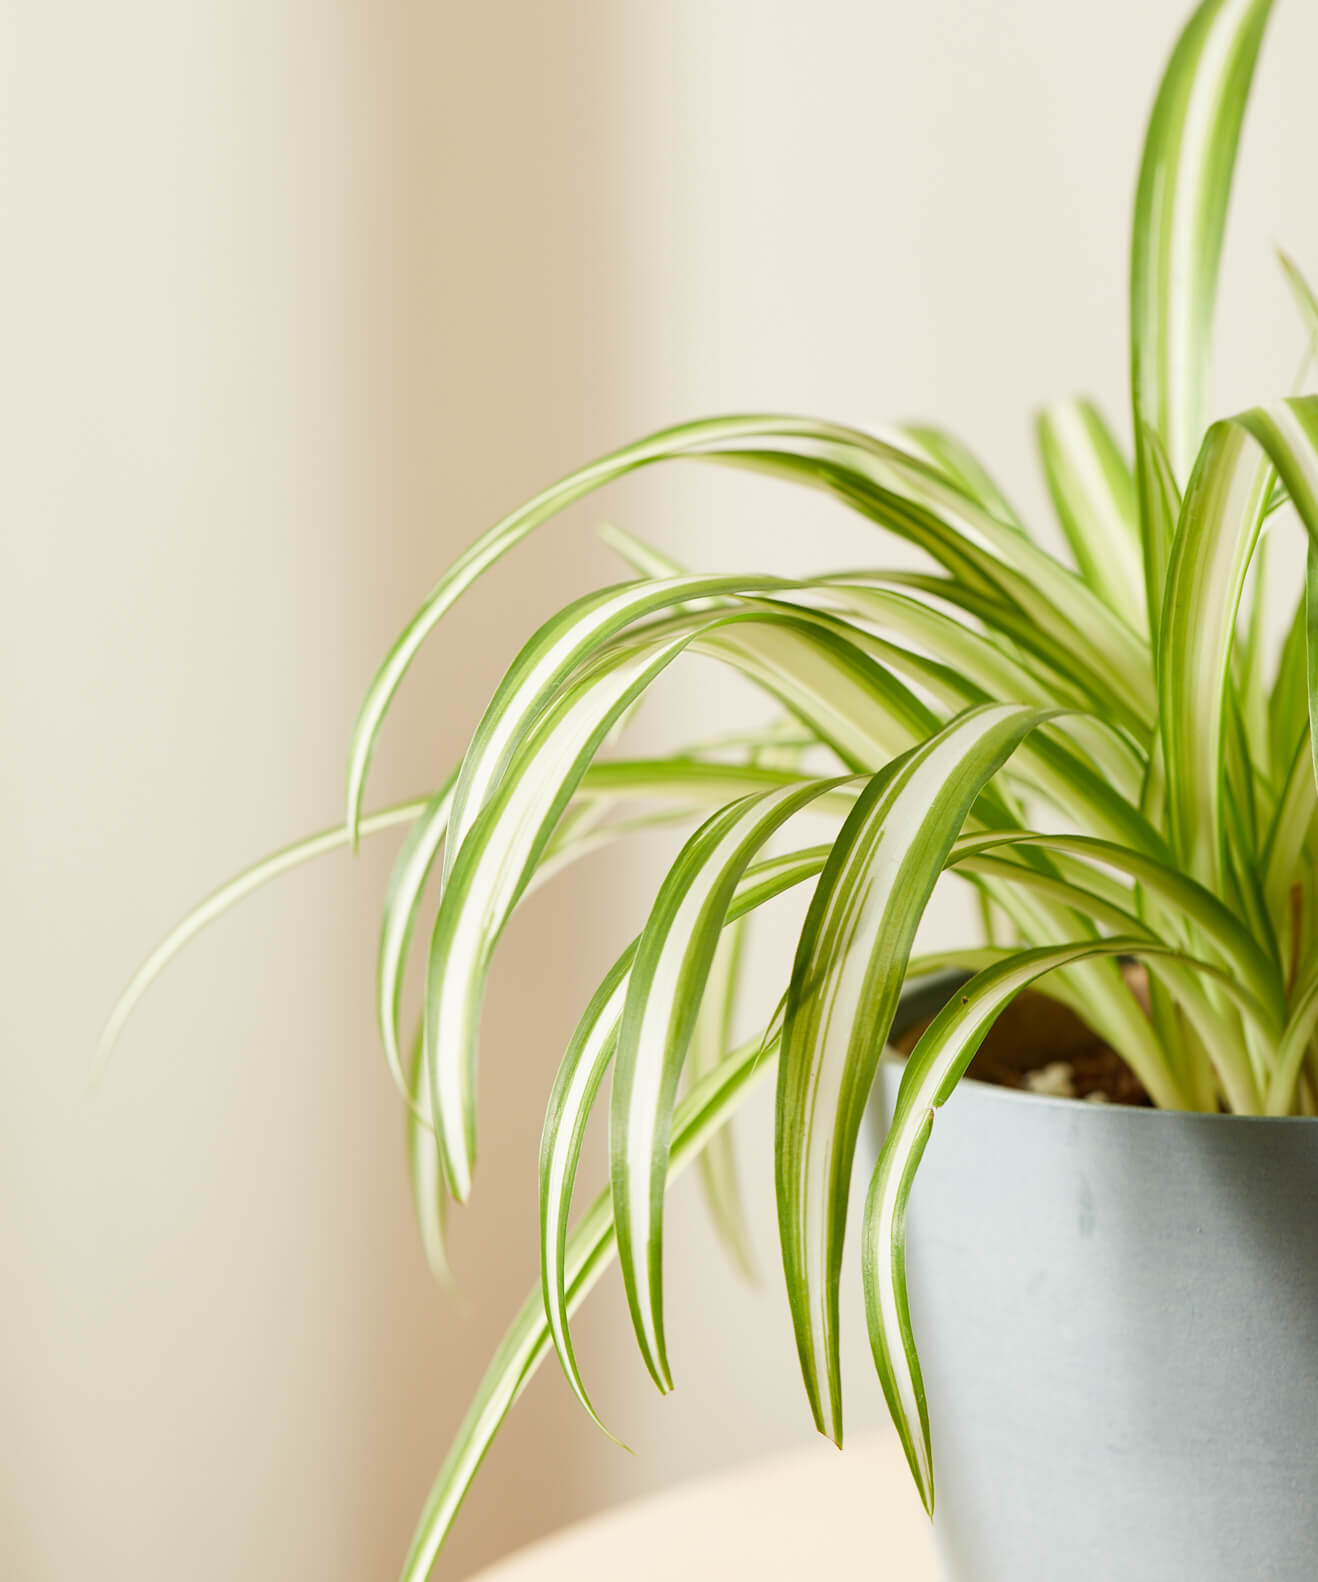 Buy Potted Spider Plant Indoor Houseplant Bloomscape,What Is An Ionizer